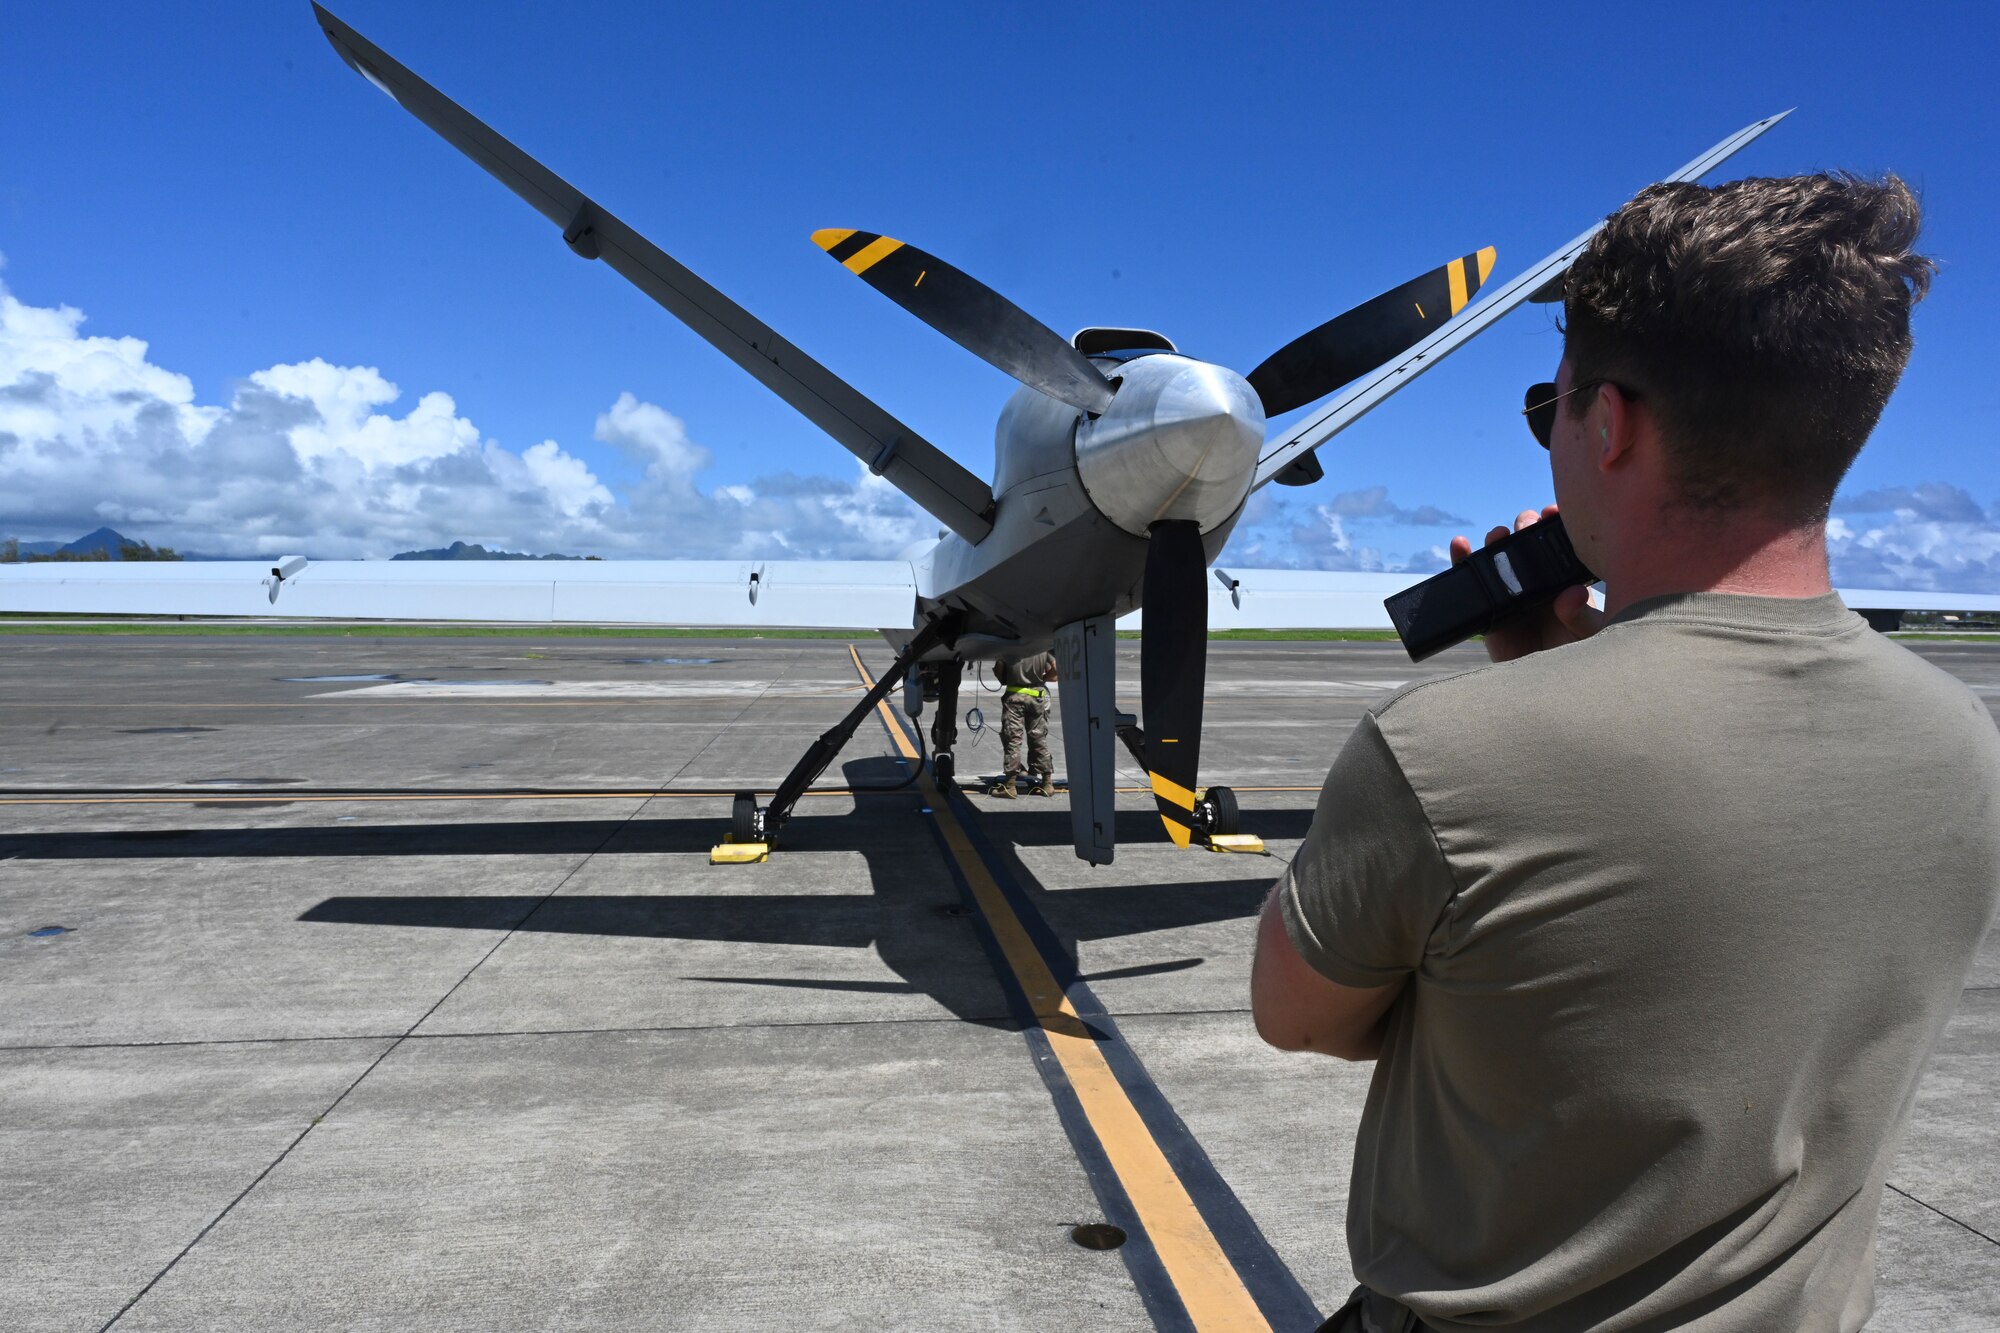 Senior Airman Jacob Way, 49th Aircraft Maintenance Squadron dedicated crew chief, conducts preflight operations checks Sept. 15, 2021, on Marine Corps Base Hawaii. Exercise Agile Combat Employment Reaper is an opportunity to conduct training with joint partners in a maritime environment and in a different airspace. (U.S. Air Force photo by Airman 1st Class Adrian Salazar)